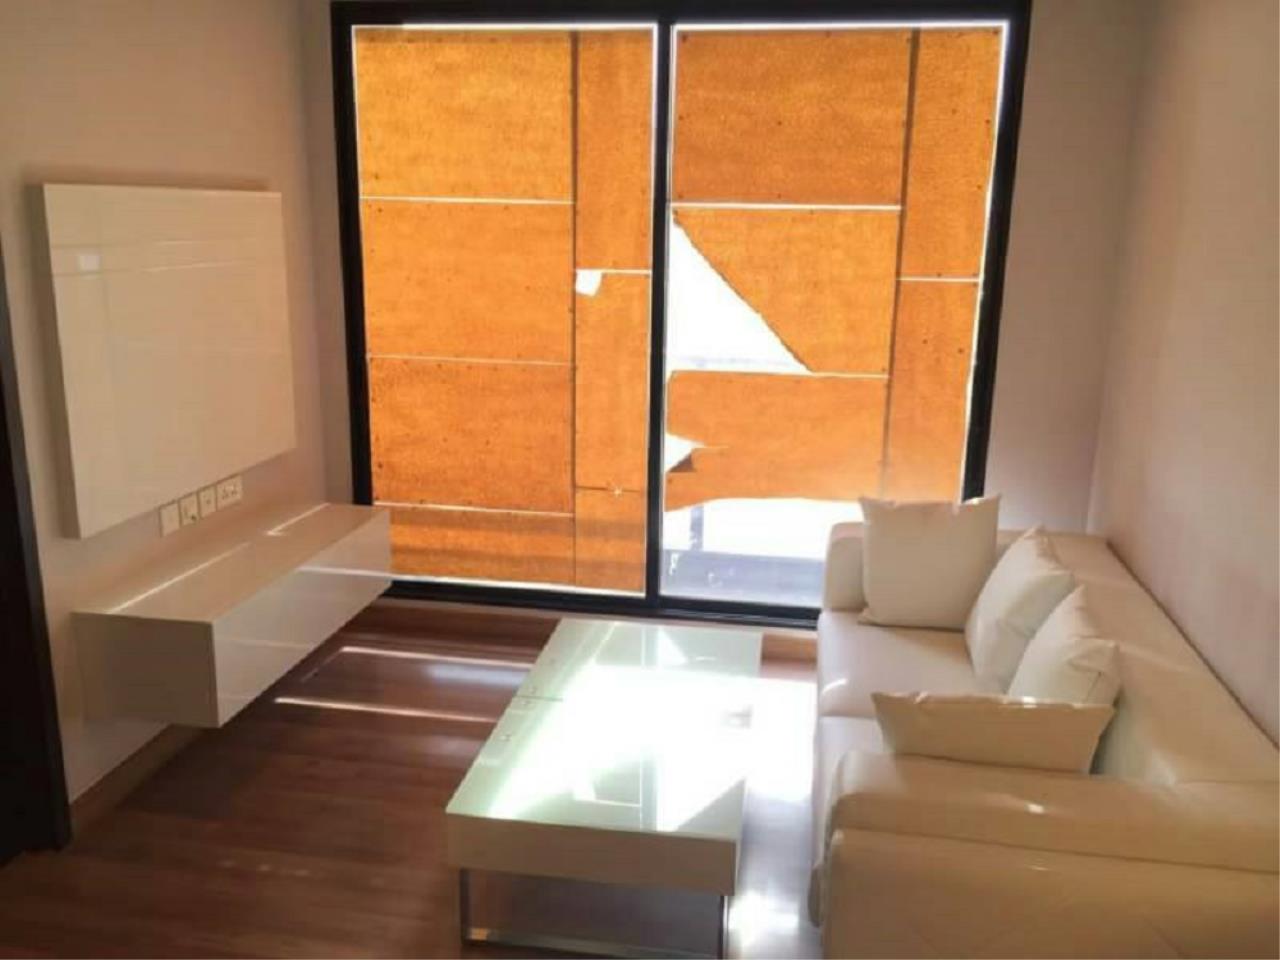 RE/MAX CondoDee Agency's Luxury Condo on Ratchadaphisek with Privacy 7